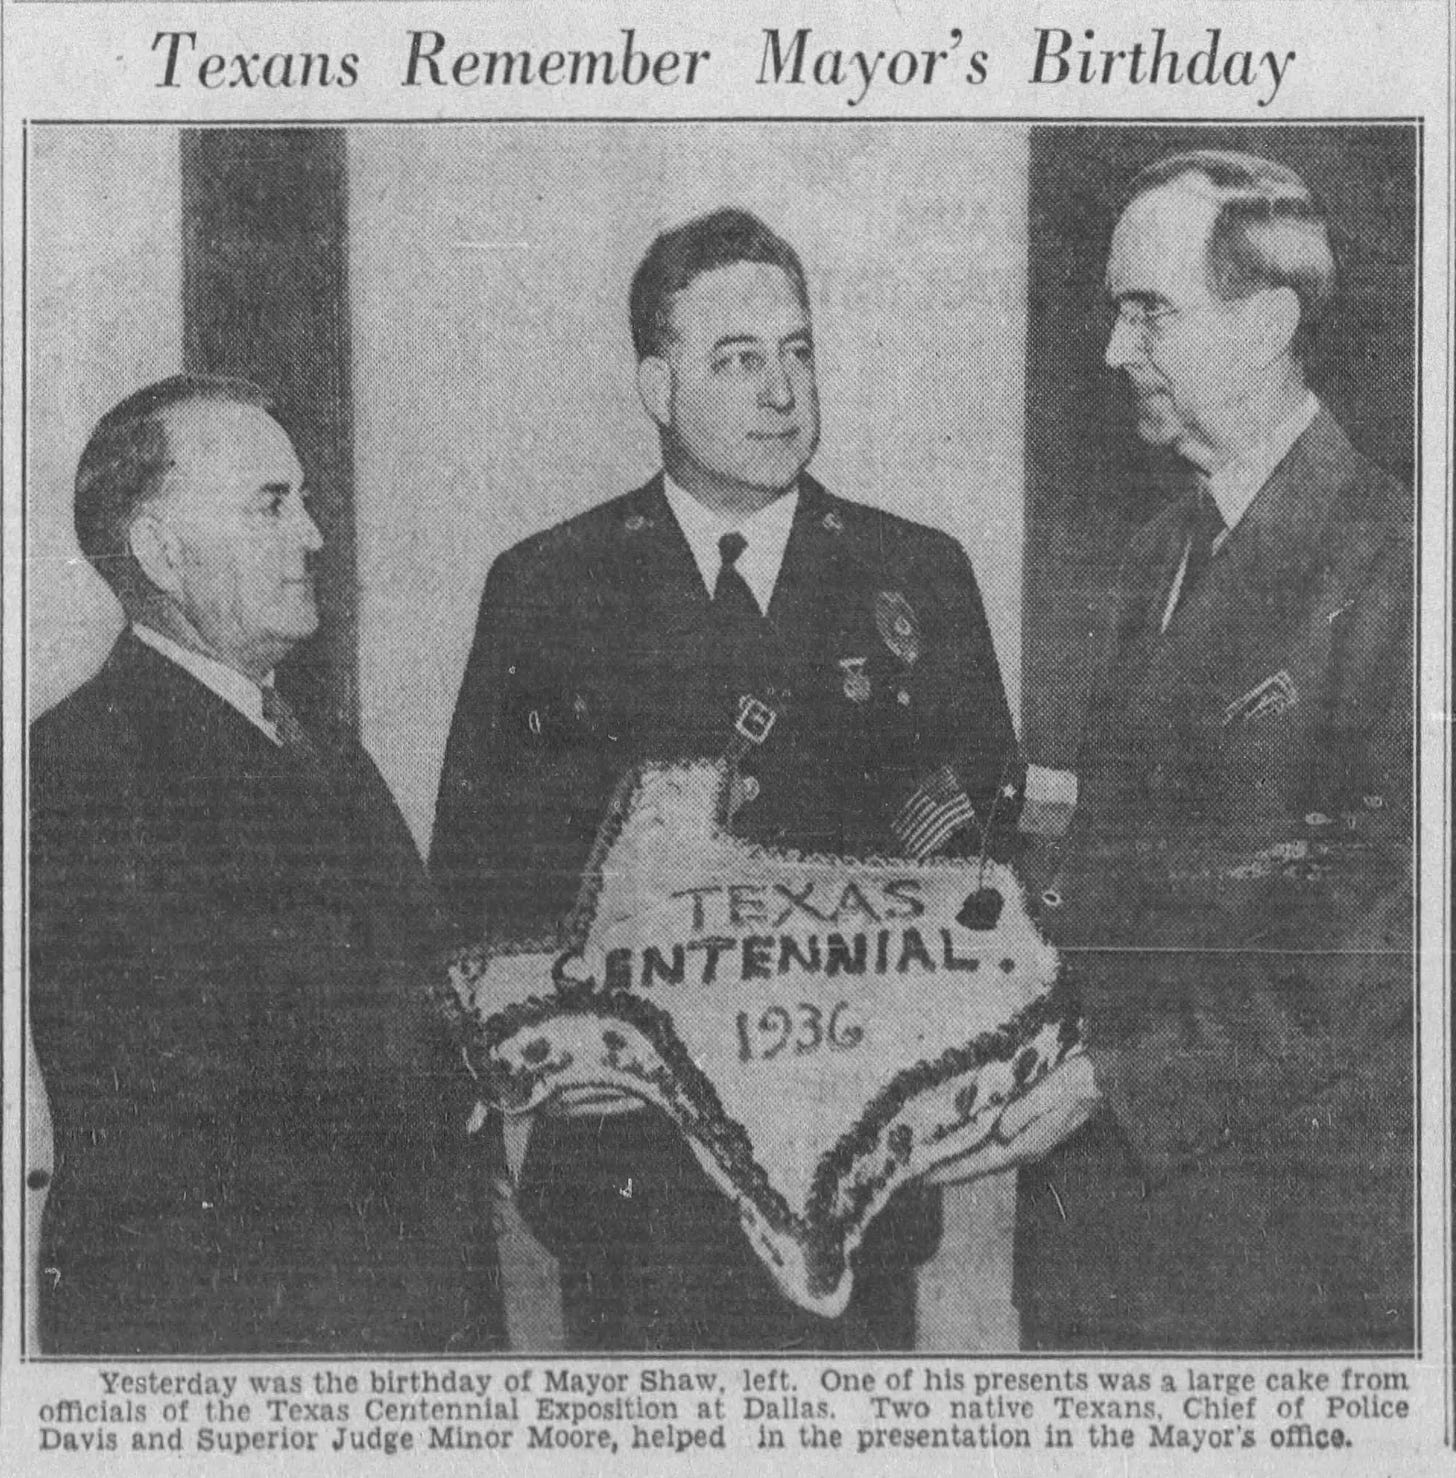 A newspaper clipping of three men standing around a white cake shaped like the state of Texas. It has white frosting with dark lettering and trim. The lettering reads "Texas Centennial. 1936."